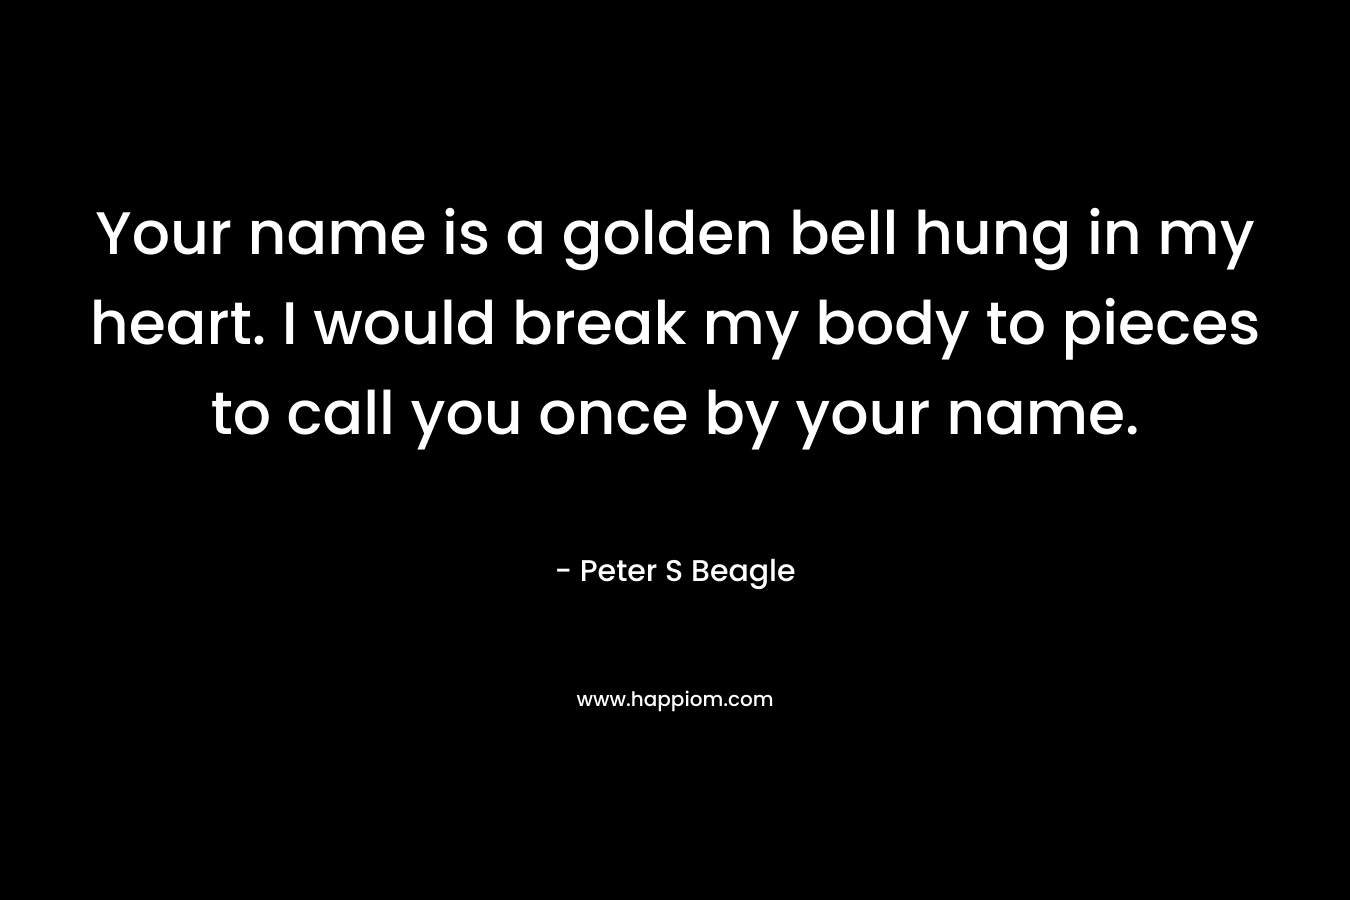 Your name is a golden bell hung in my heart. I would break my body to pieces to call you once by your name. – Peter S Beagle